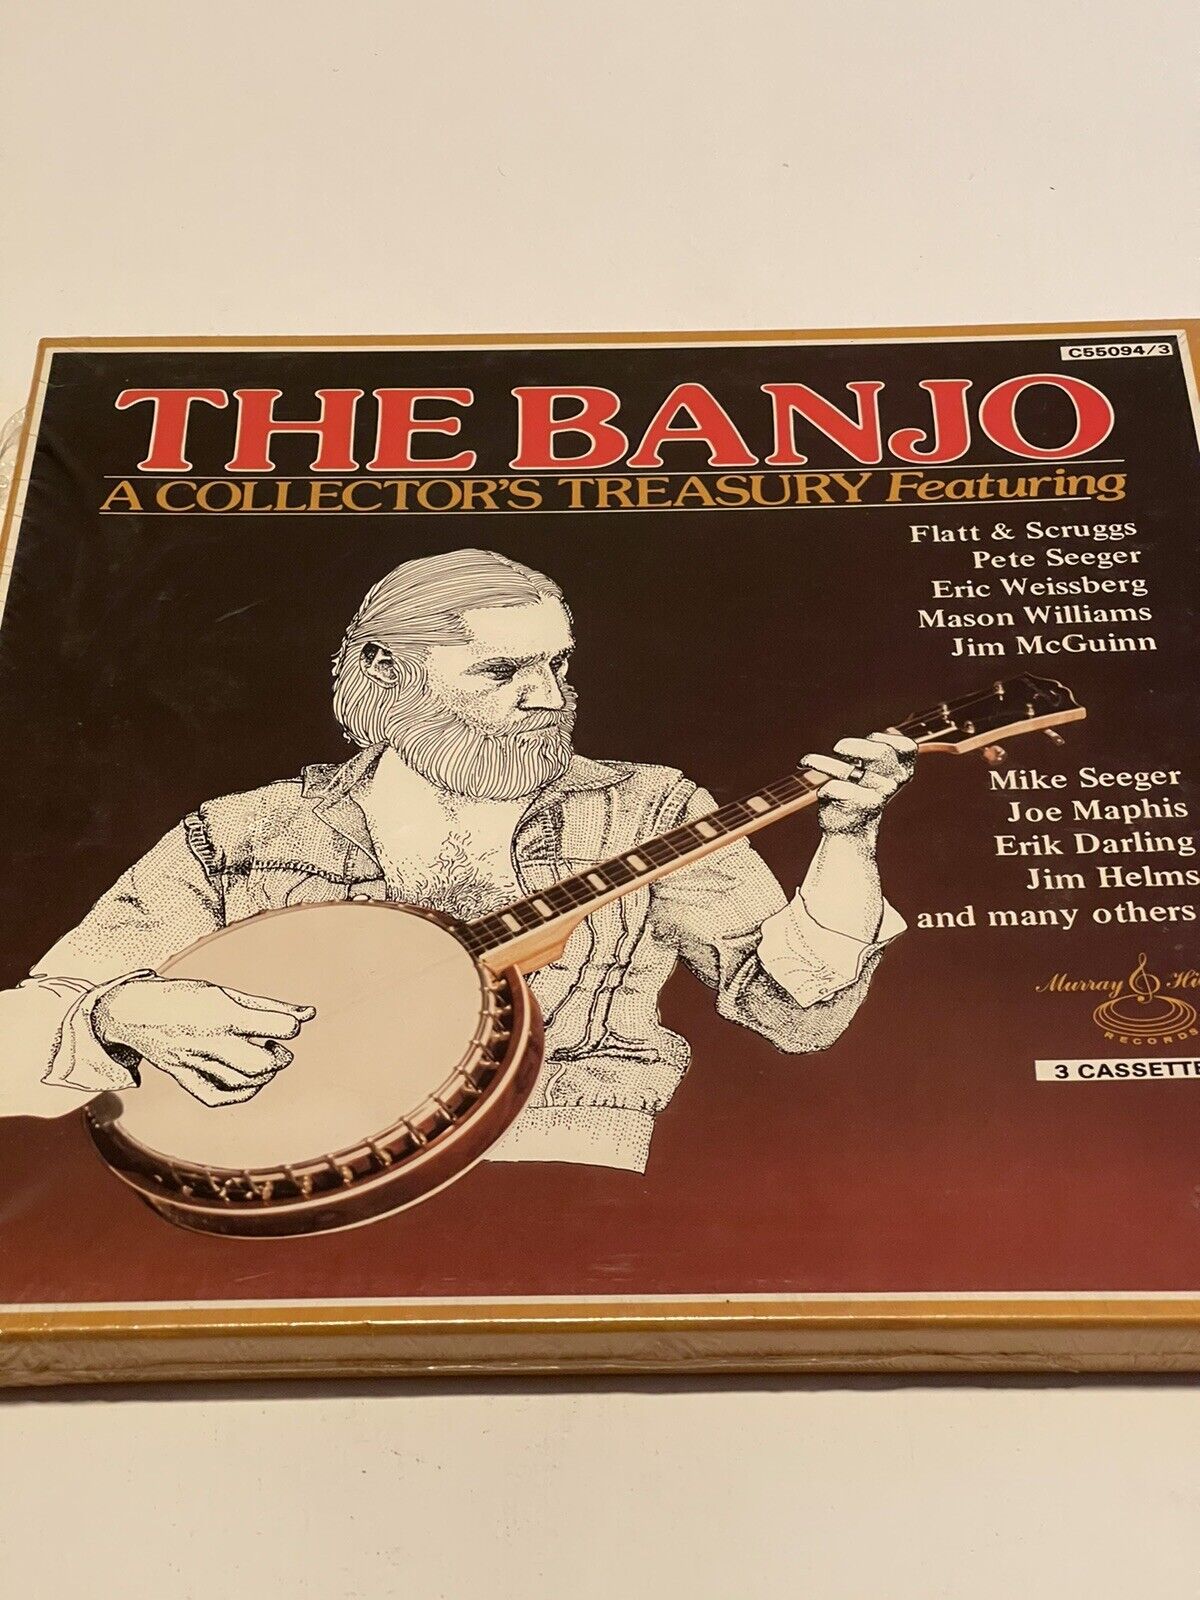 The Banjo A Collector’s Treasury cassette box set 3 cassettes new sealed